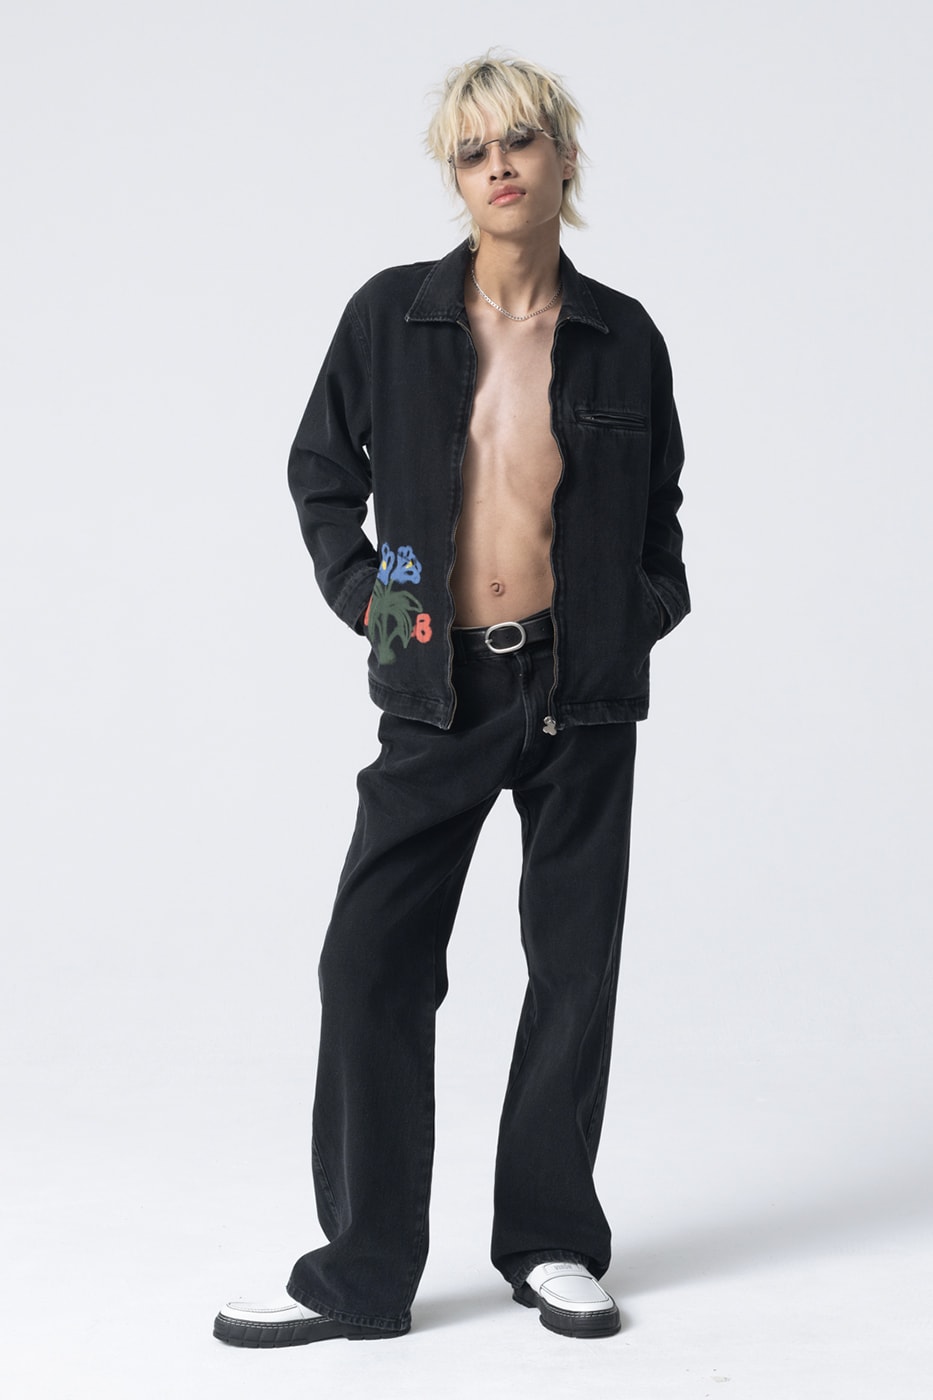 Carne Bollente SS24 Evokes the Romance of the First Kiss sex hot ethical organic denim provocative gay lgbtqia 